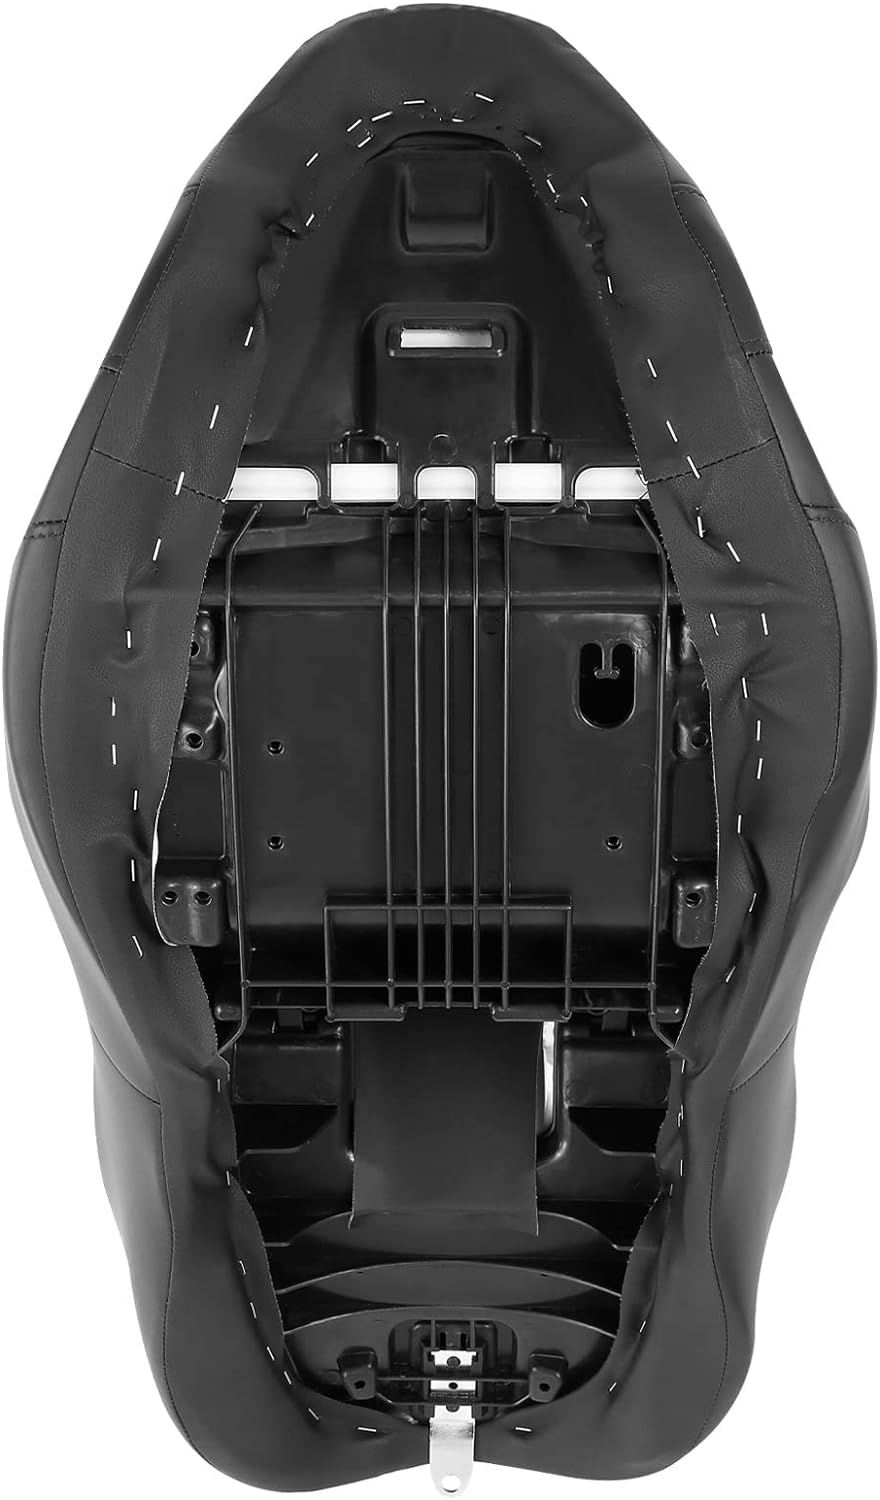 XMT-MOTO Hammock Rider and Passenger Seat fits for Harley Davidson Touring and Tri Glide models 2009-2023, for Road King Street Glide Road Glide Electra Glide models,Black - XMT-MOTO Hammock Rider And Passenger Seat Review